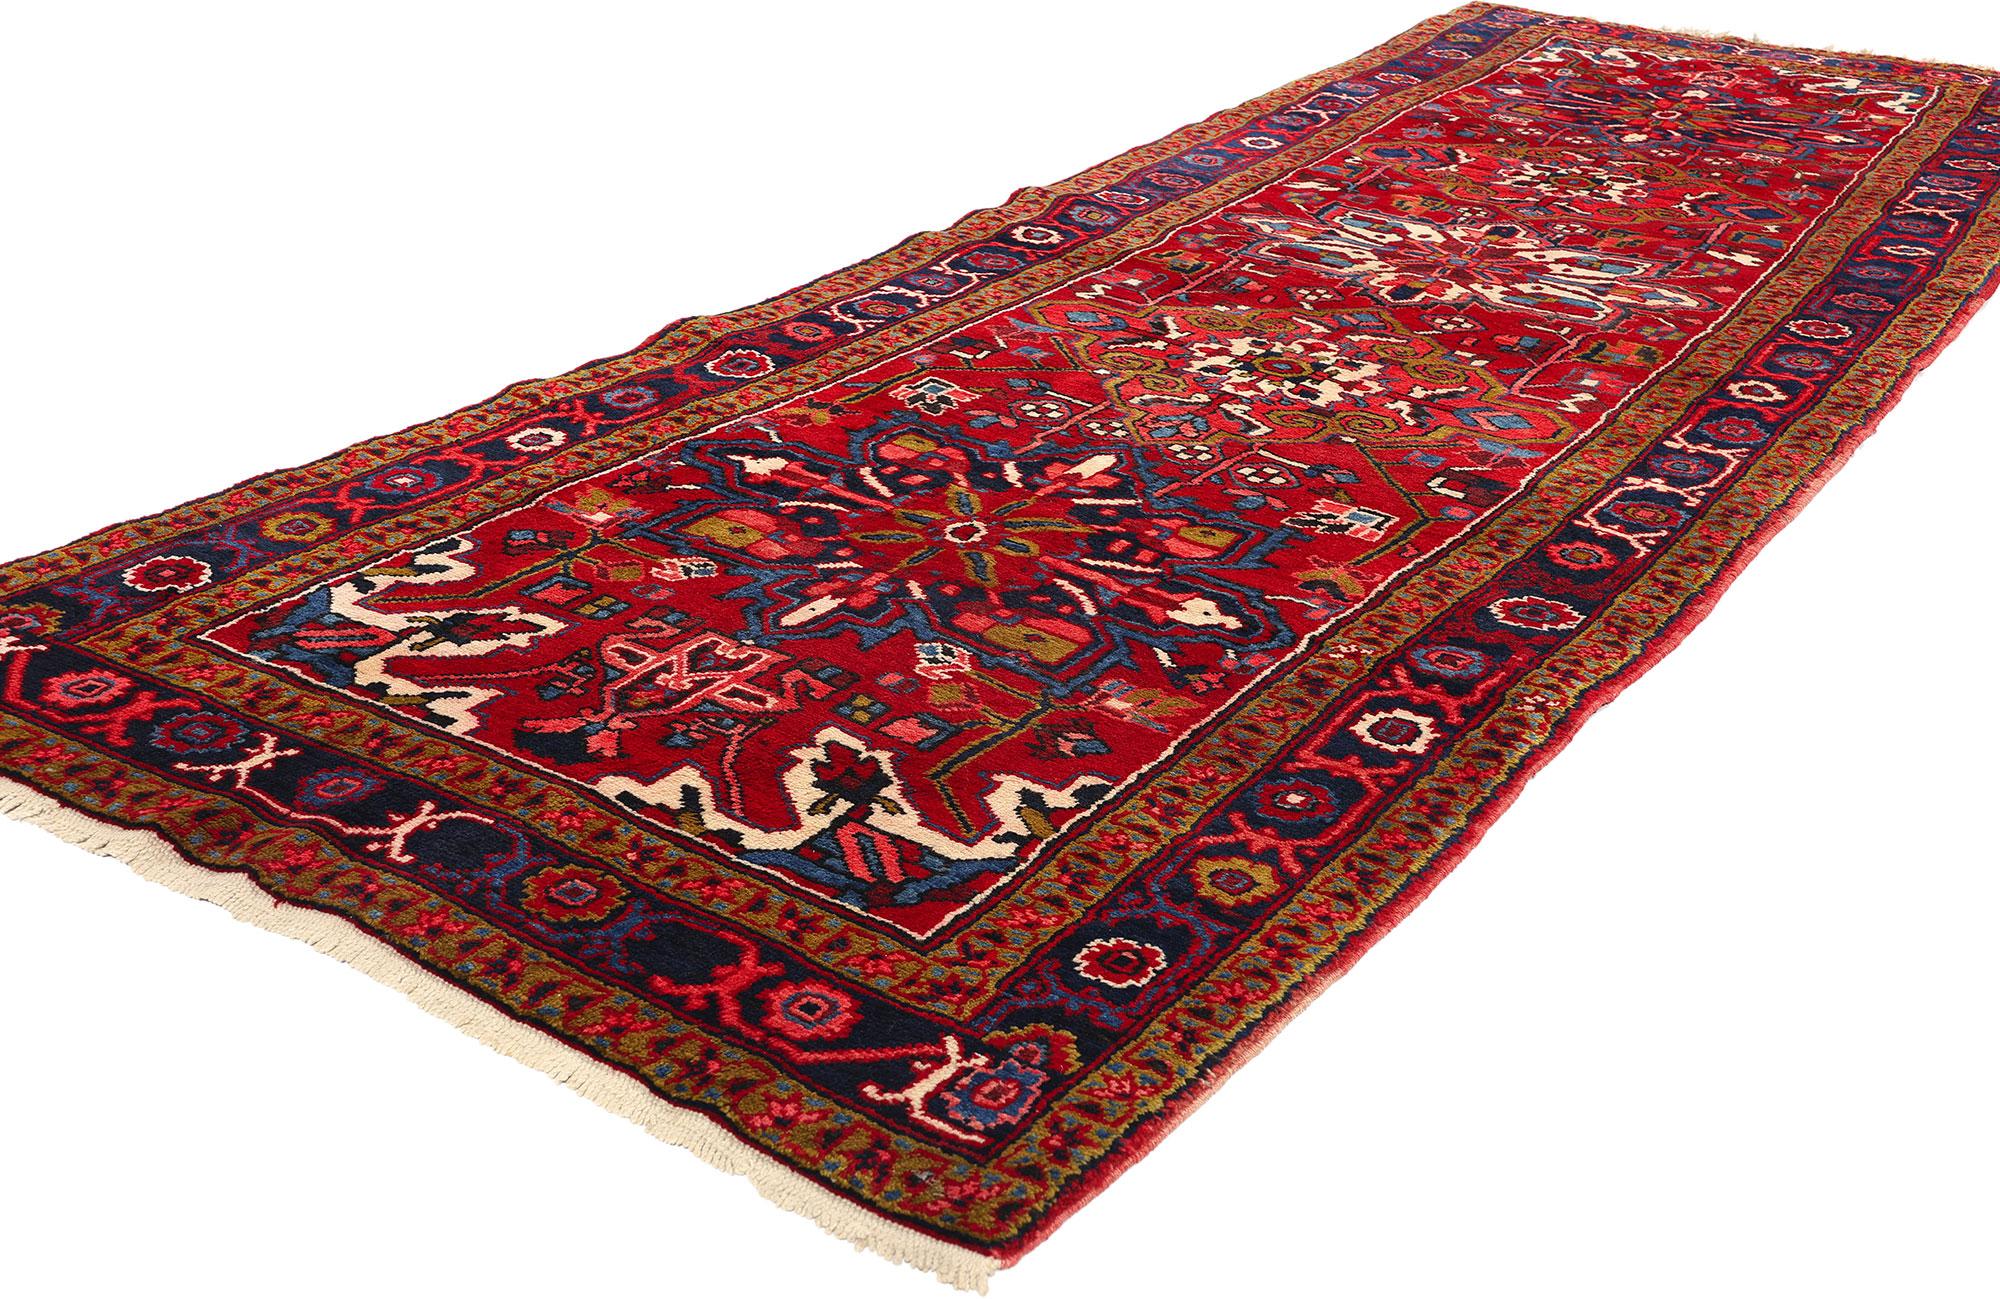 60247 Vintage Persian Heriz Rug Runner, 03'09 x 11'06. Persian Heriz carpet runners are a specific type of Heriz rug crafted in a long and narrow format, ideal for adorning hallways, staircases, and other narrow spaces in the home. Like traditional